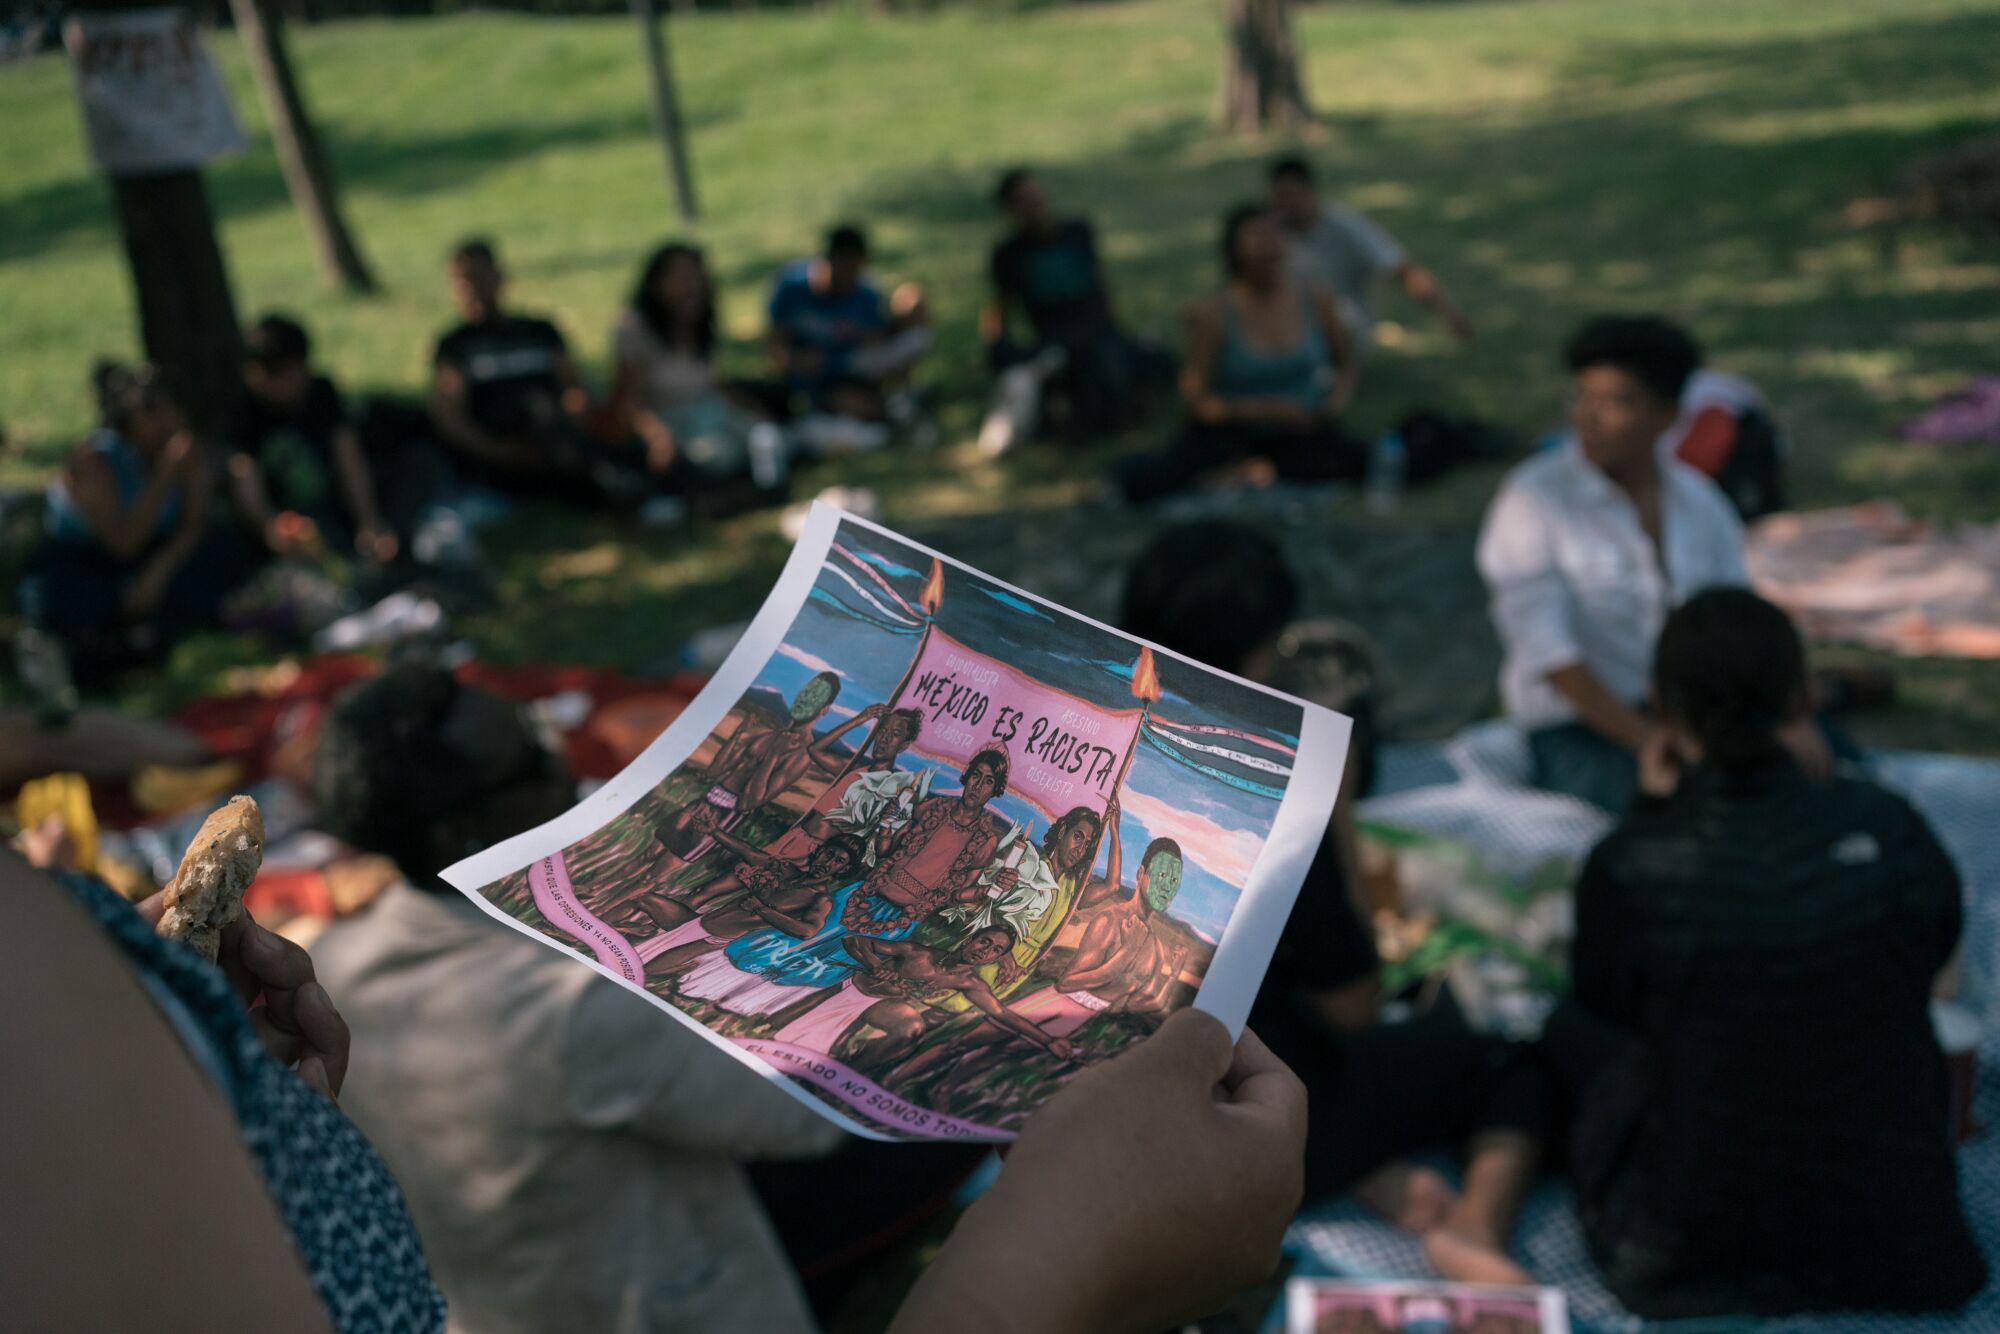  An attendee holds an illustration in a park setting 